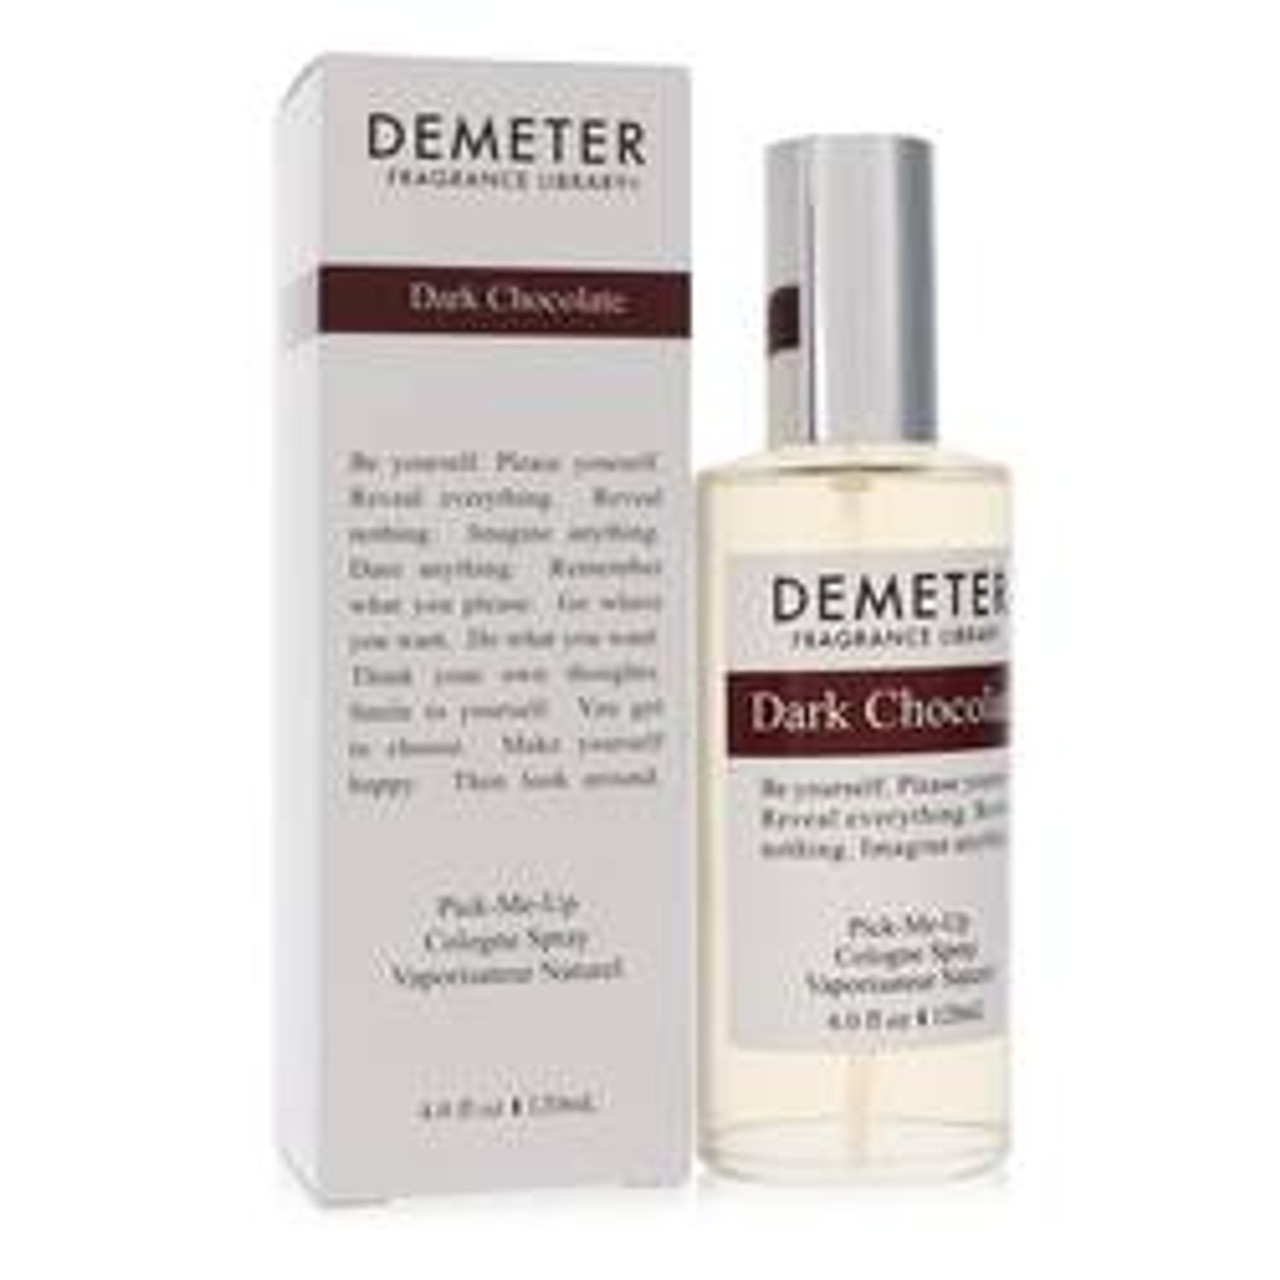 Demeter Dark Chocolate Perfume By Demeter Cologne Spray 4 oz for Women - [From 79.50 - Choose pk Qty ] - *Ships from Miami